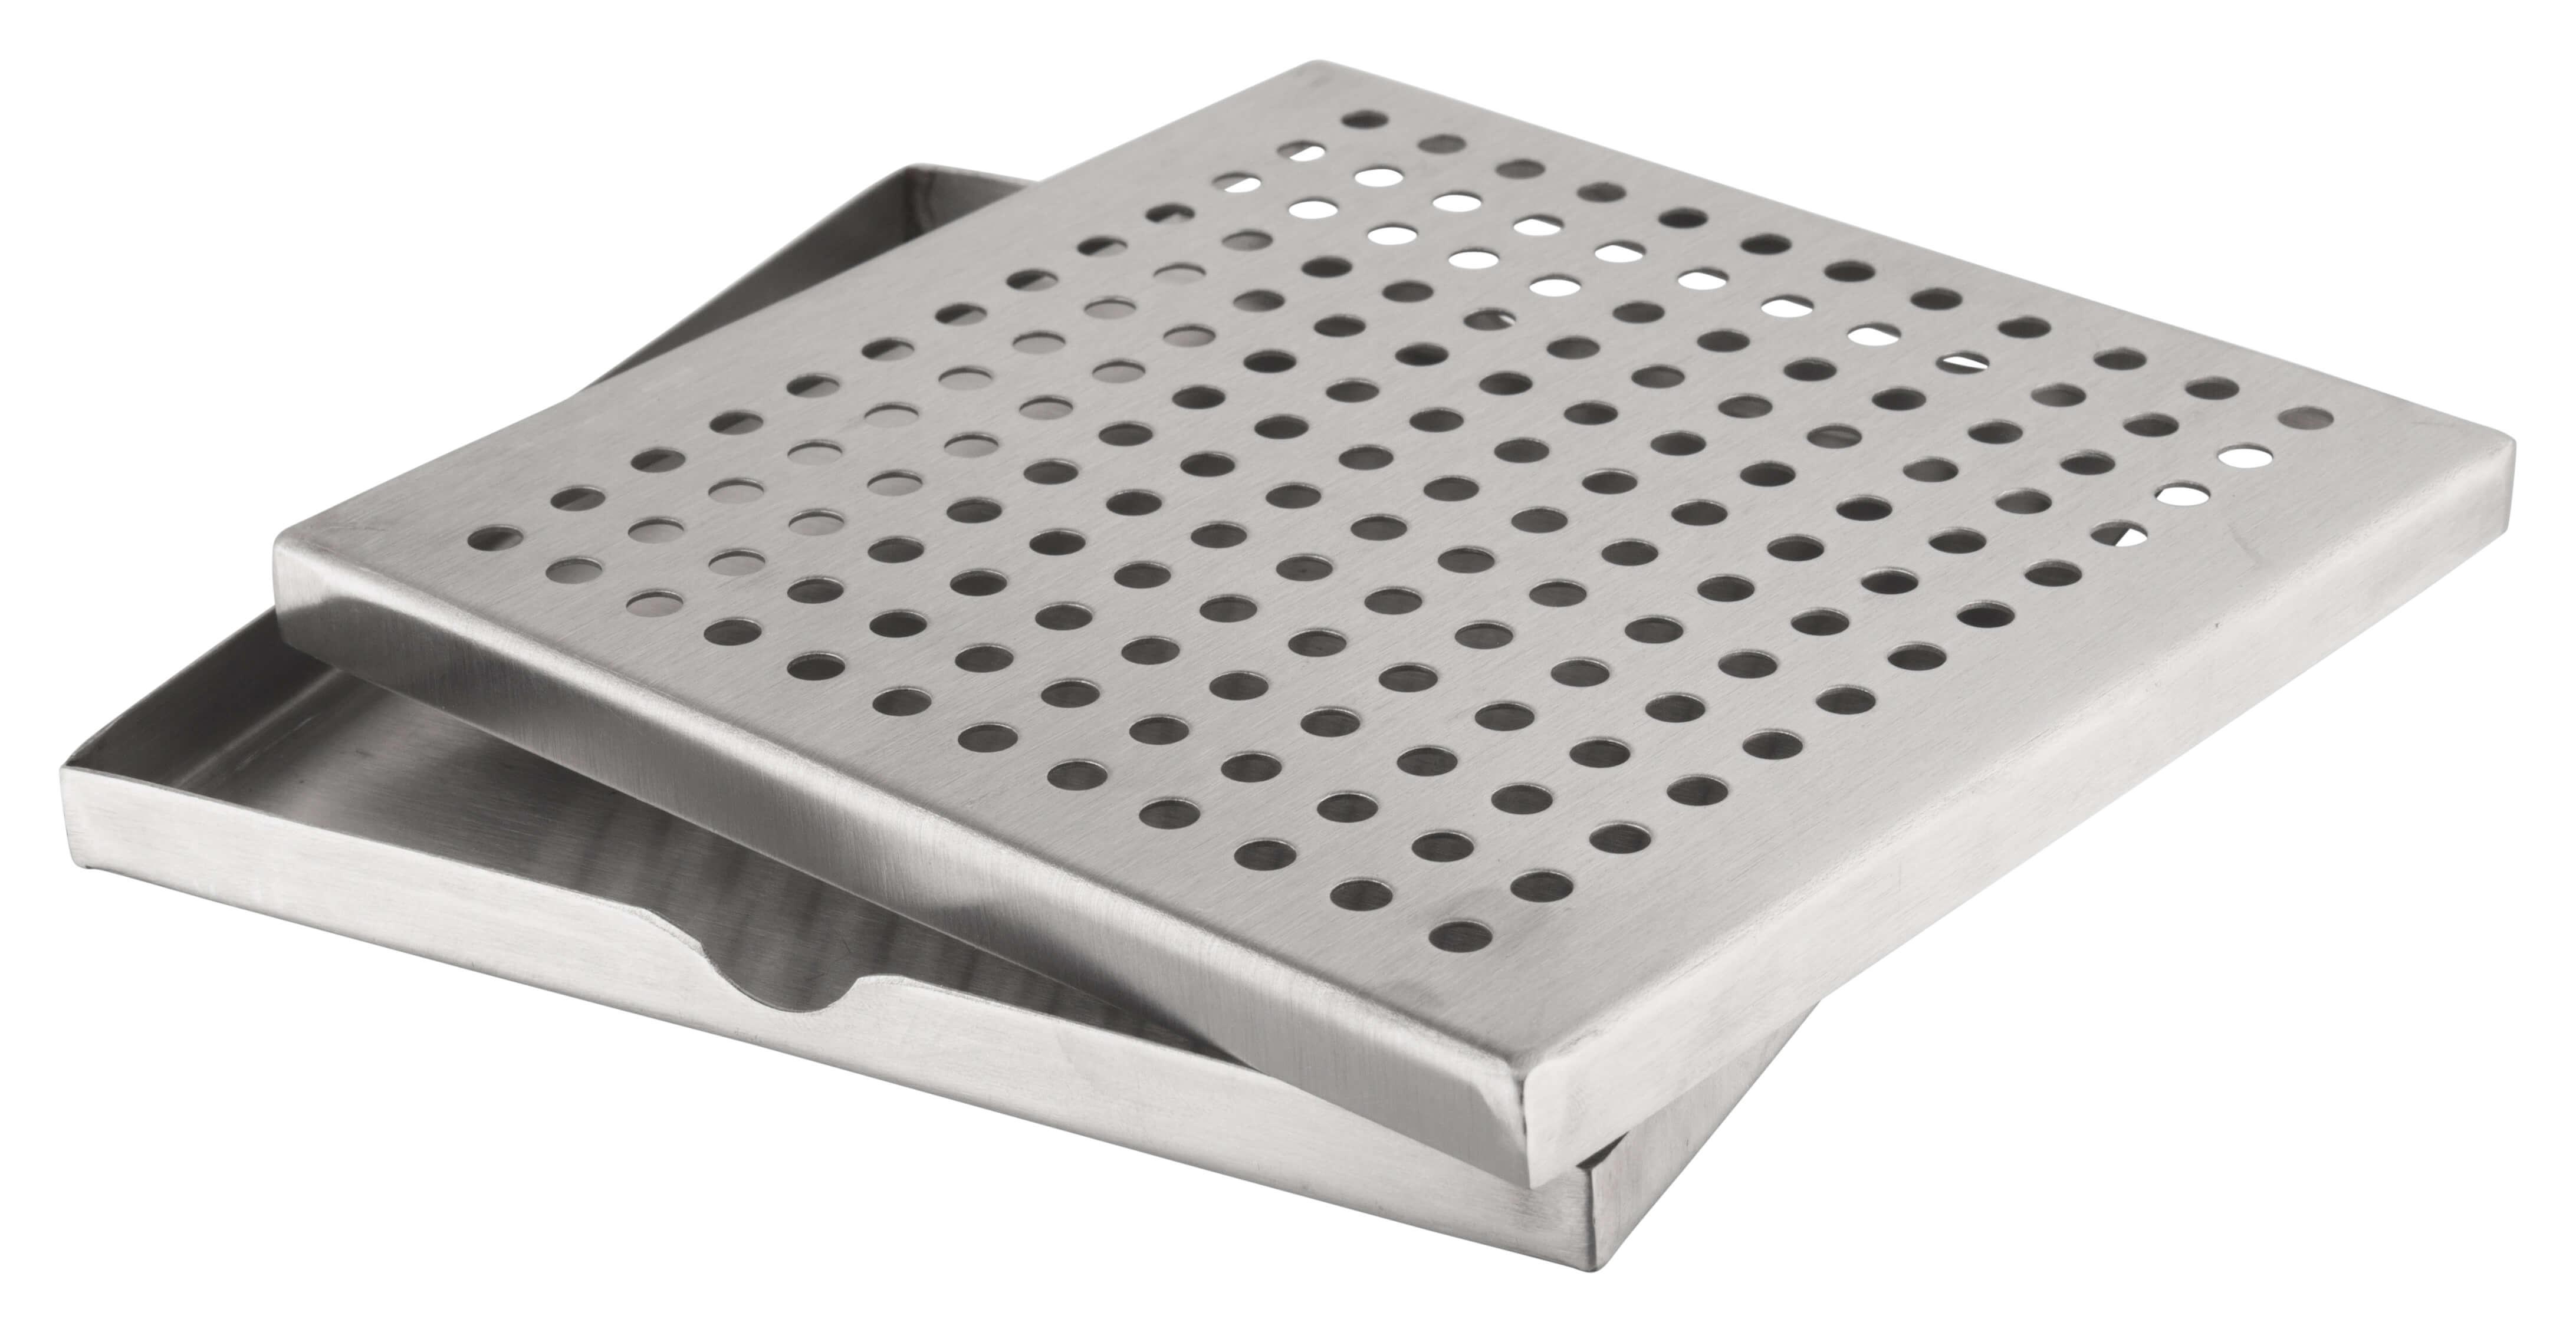 Drip Tray, stainless steel, round perforation, Prime Bar - 14x14x1cm